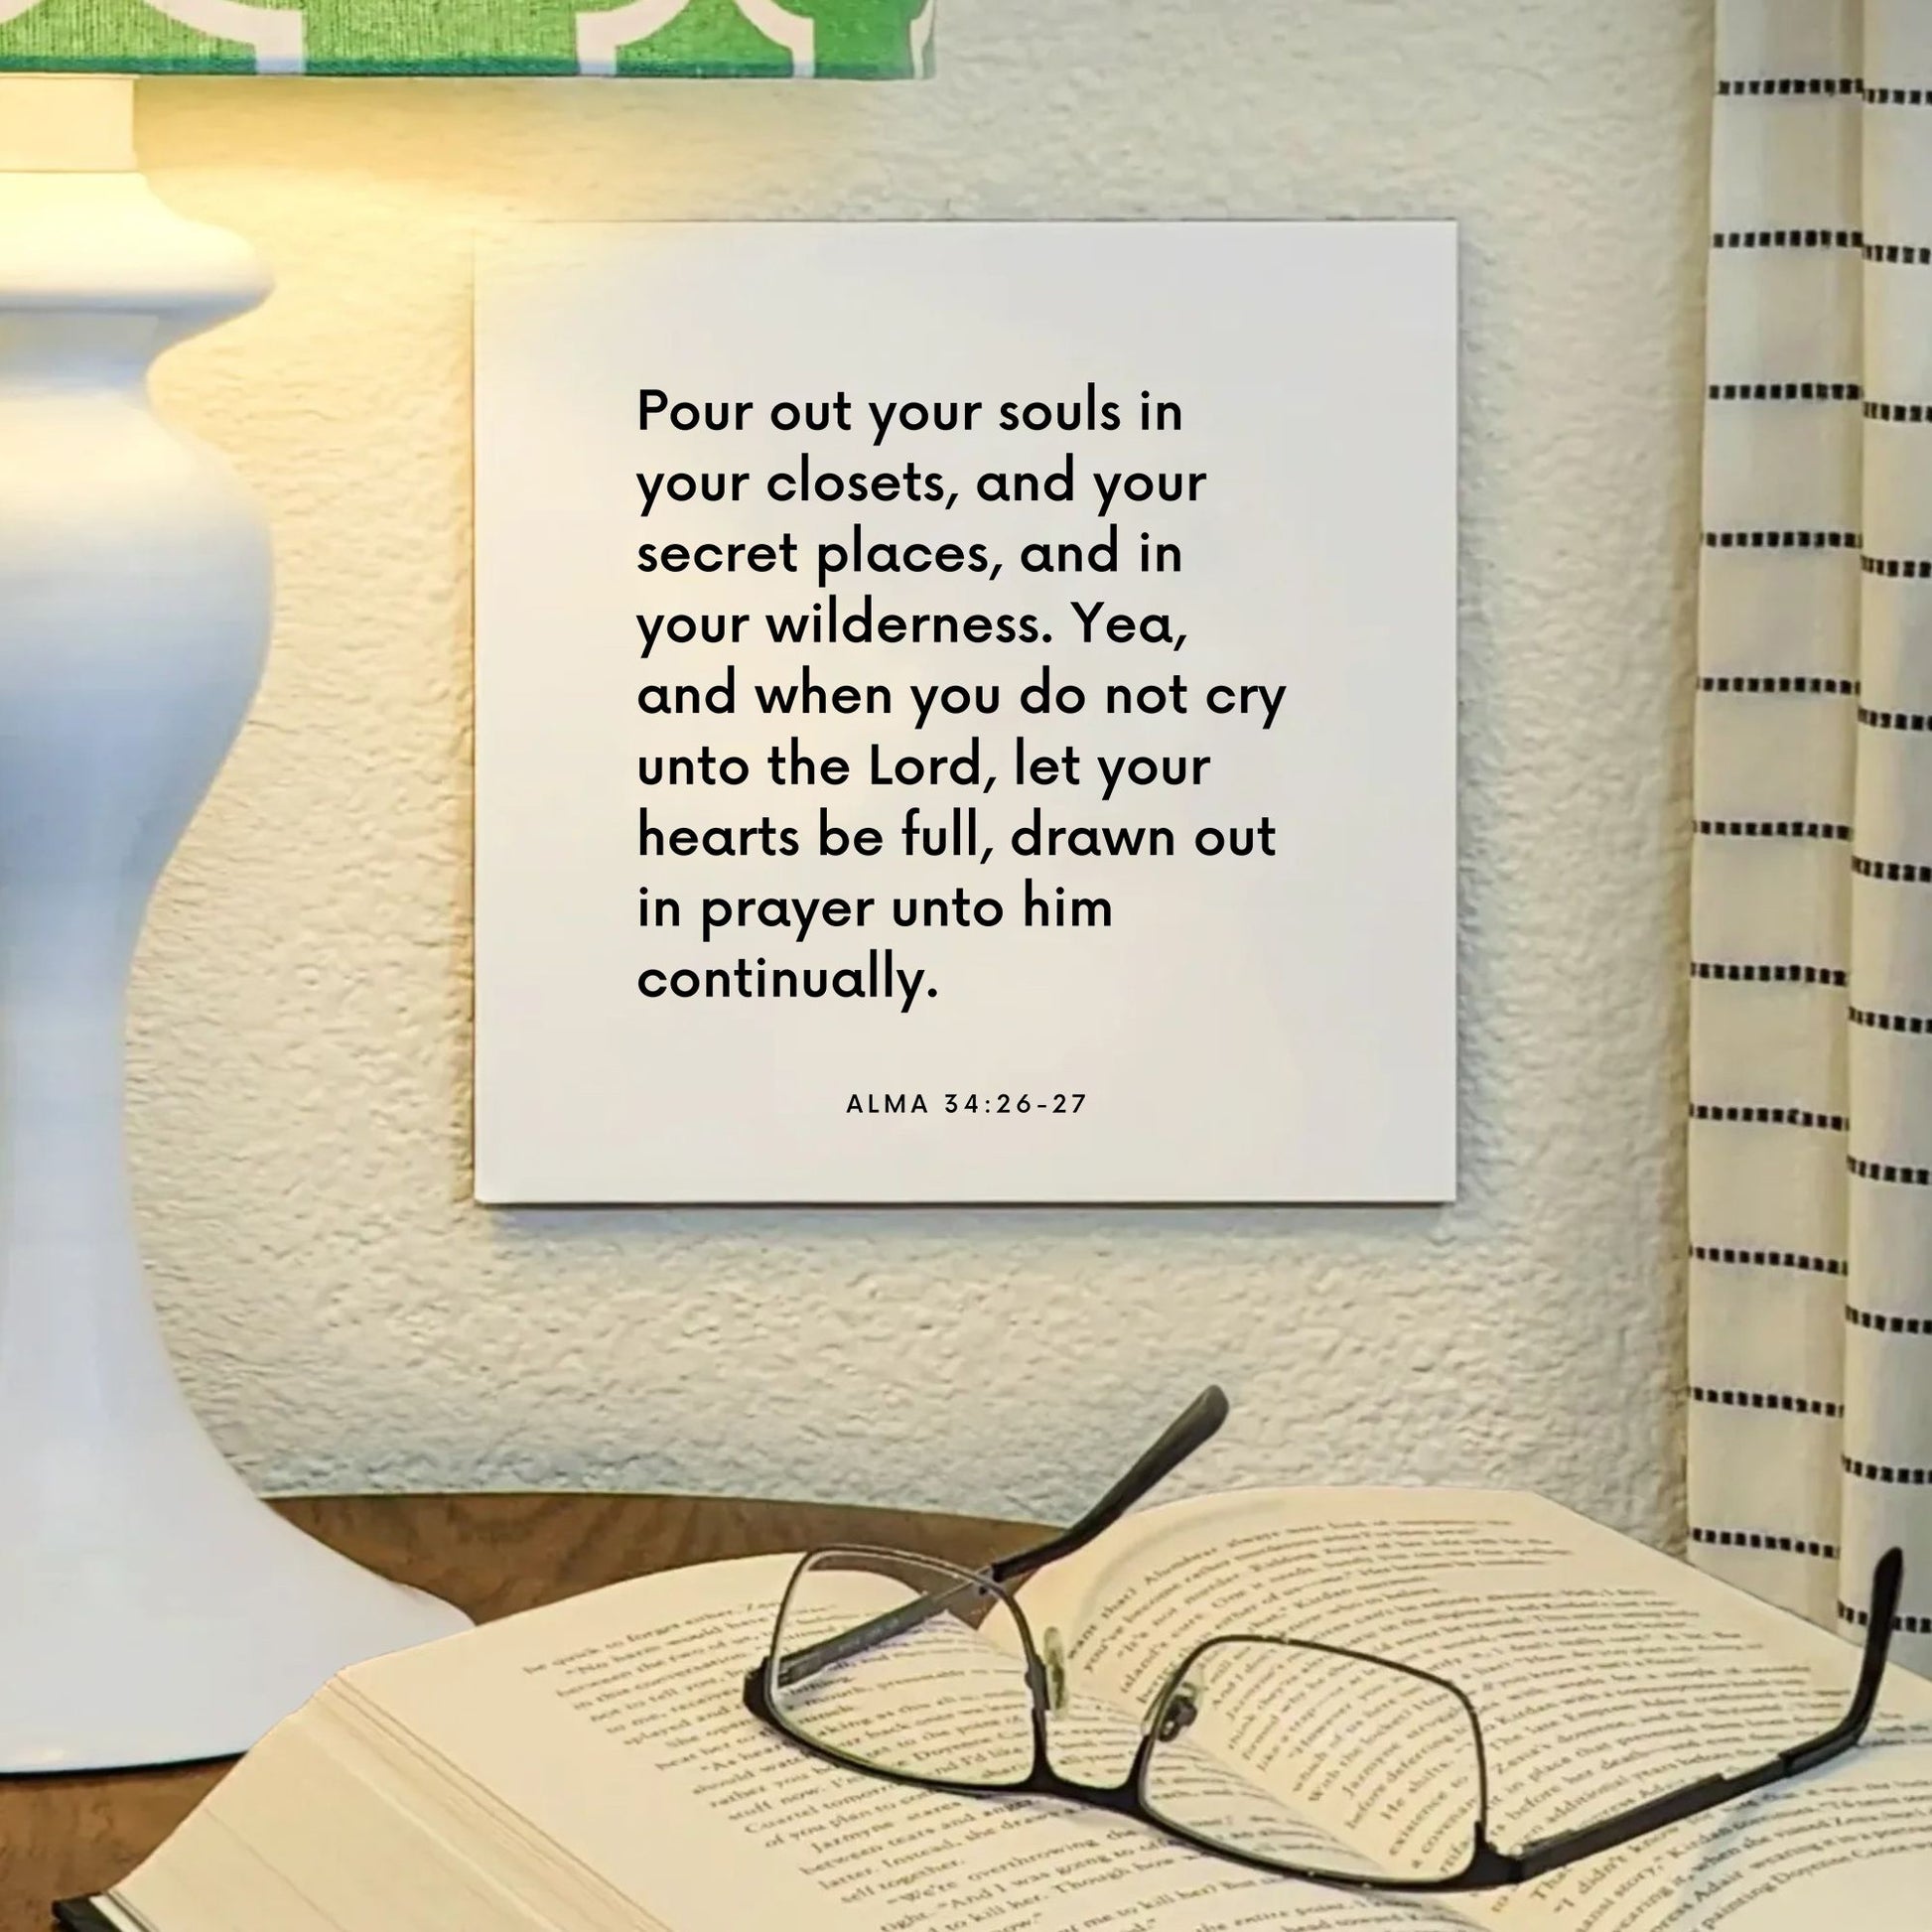 Lamp mouting of the scripture tile for Alma 34:26-27 - "Pour out your souls in your closets"